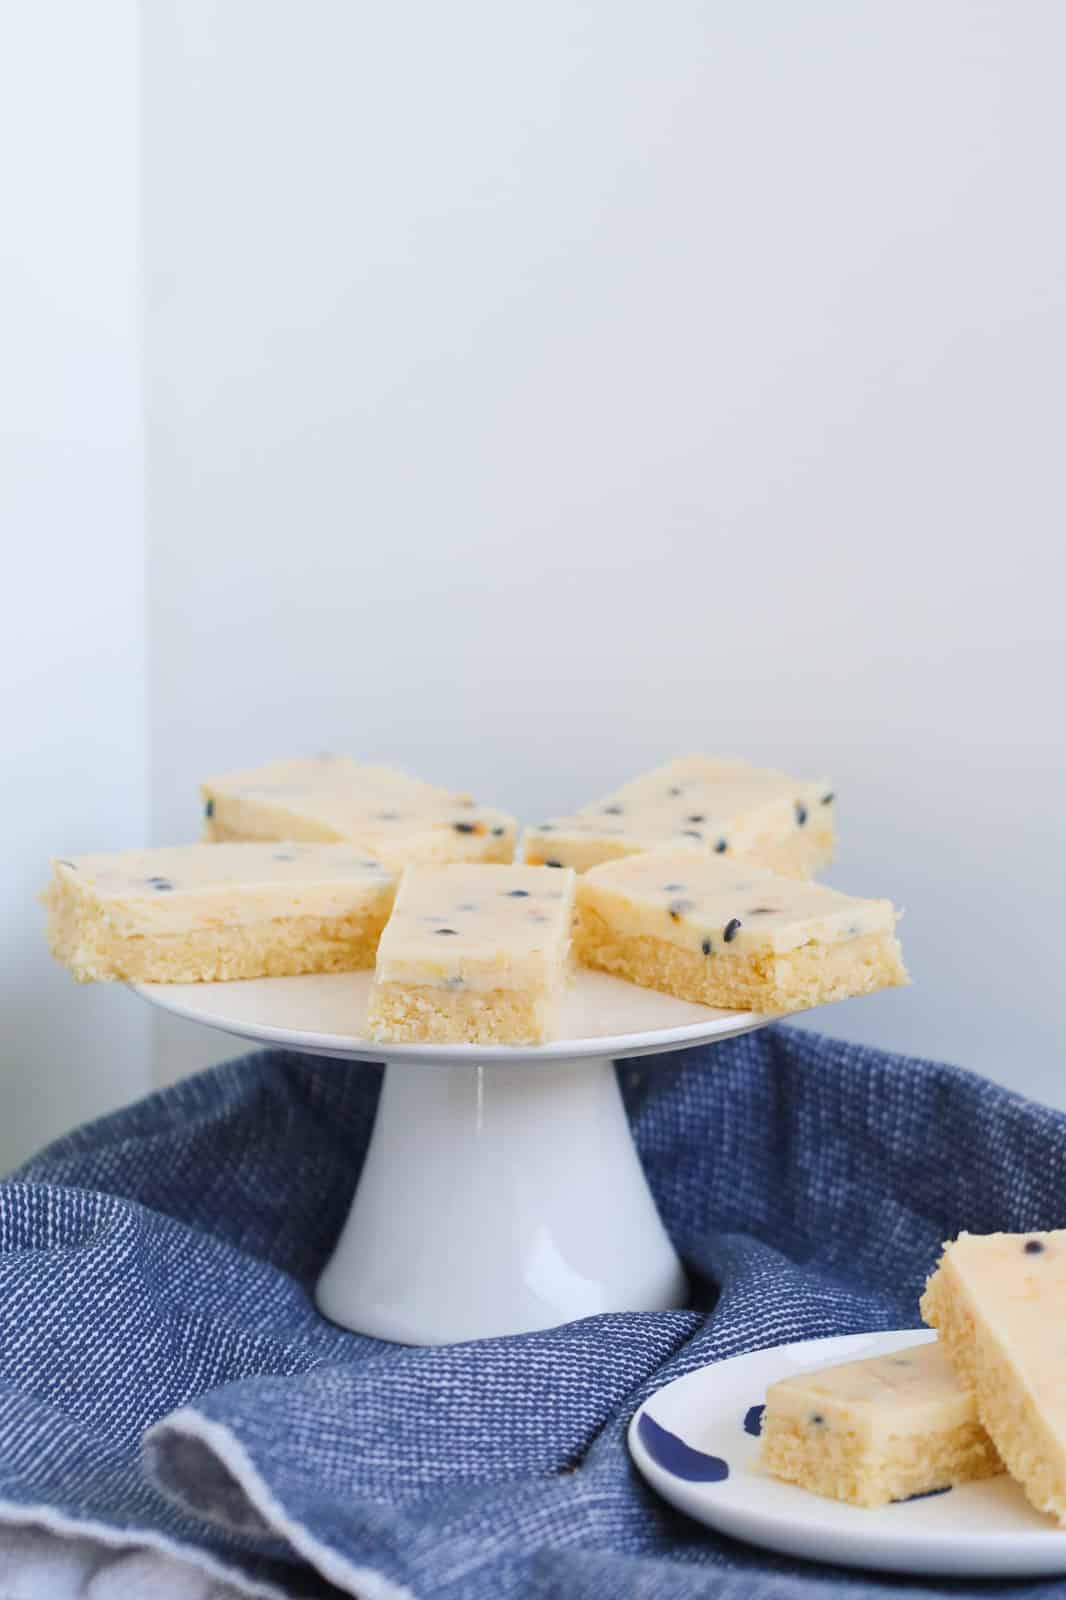 Pieces of baked passionfruit slice on a white cake stand.